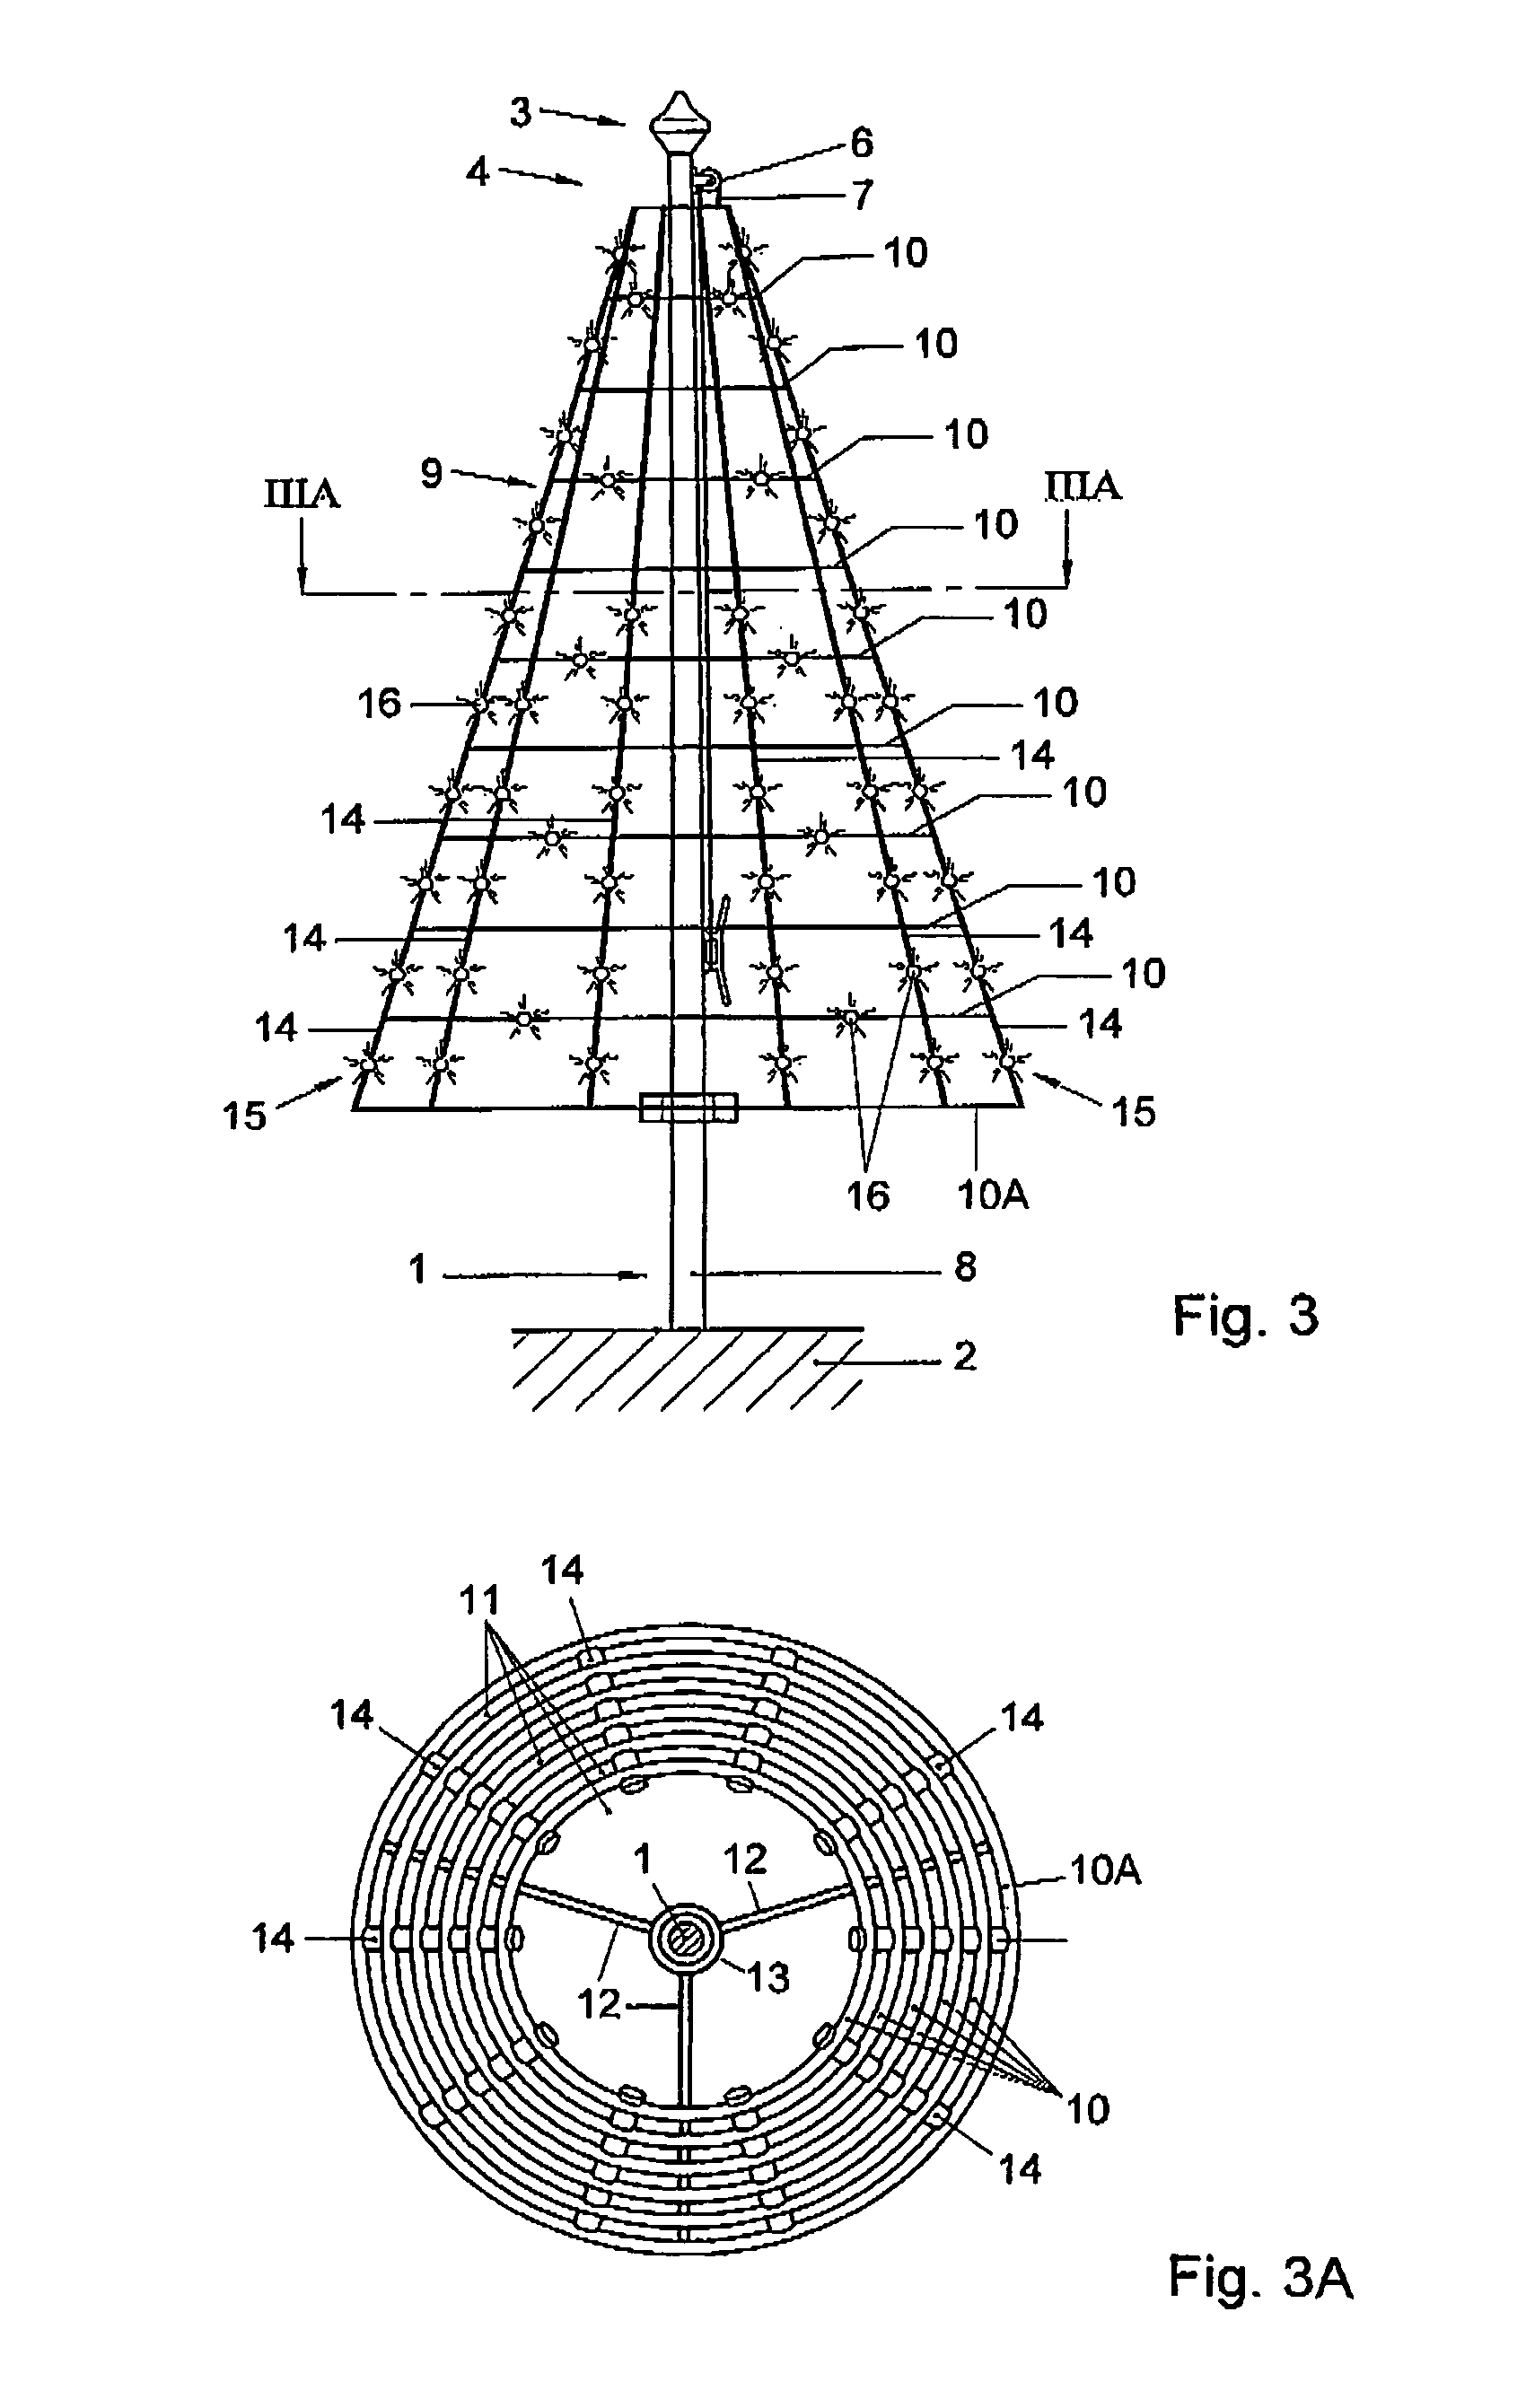 Display assembly and method for its application